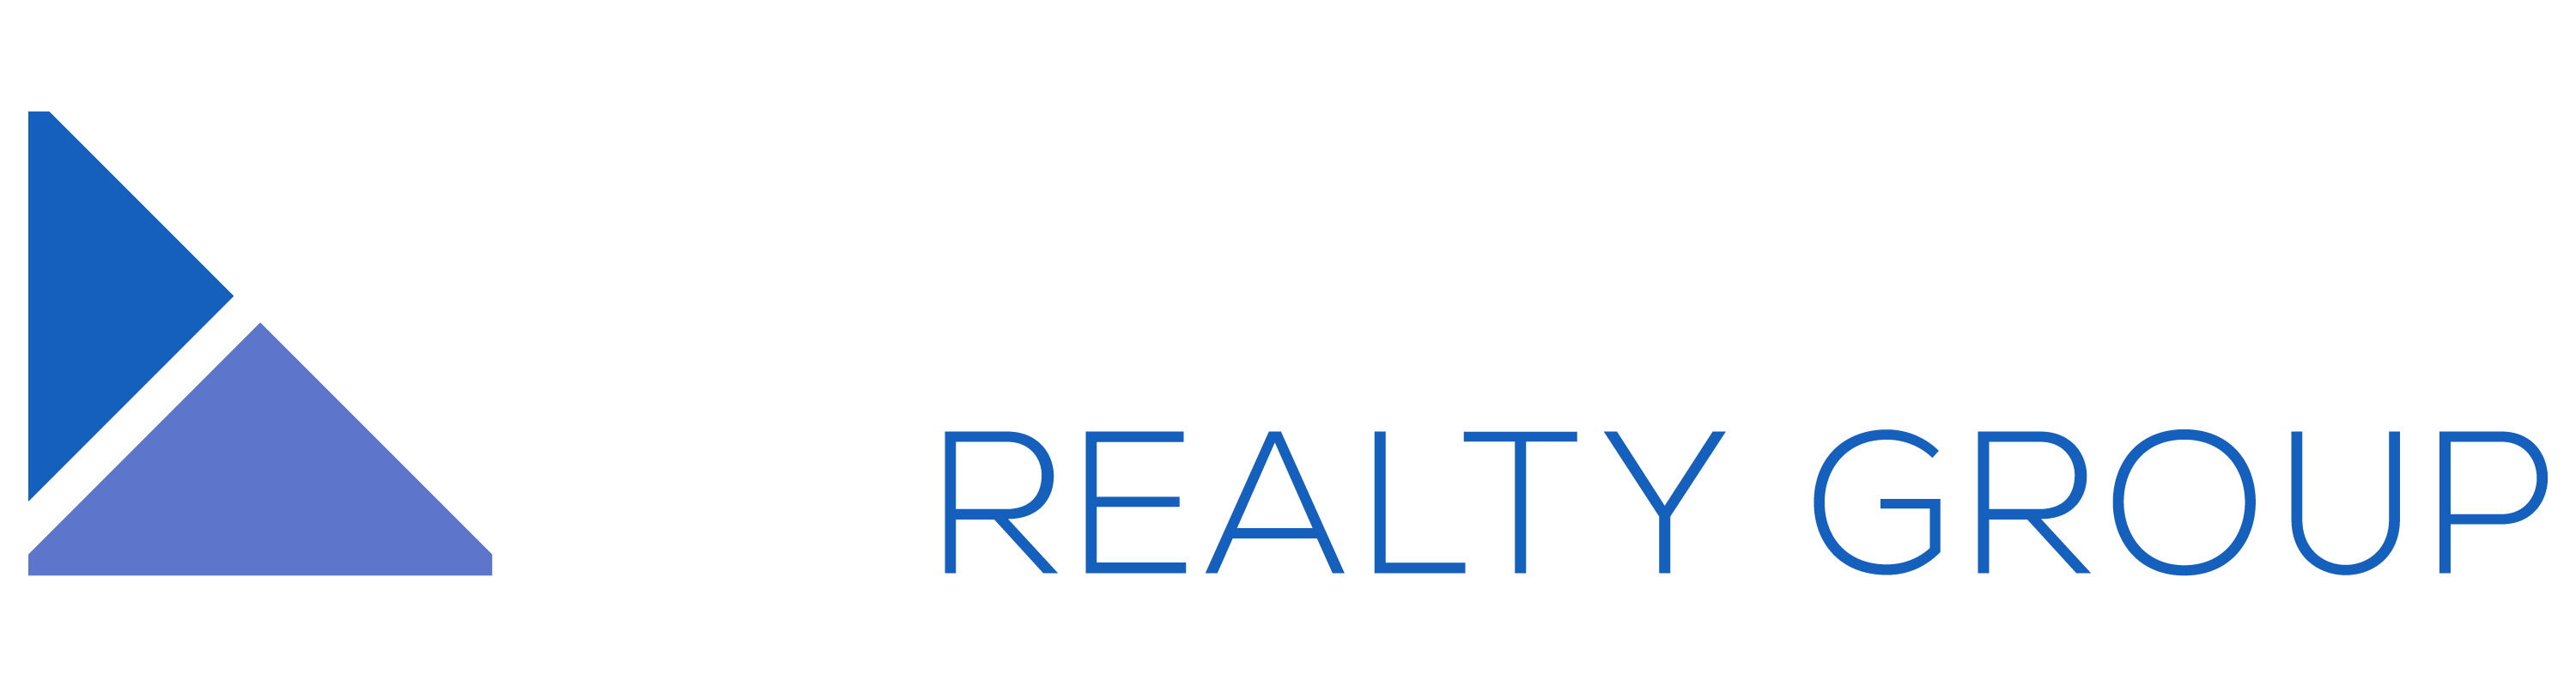 Townsend Realty Group  logo